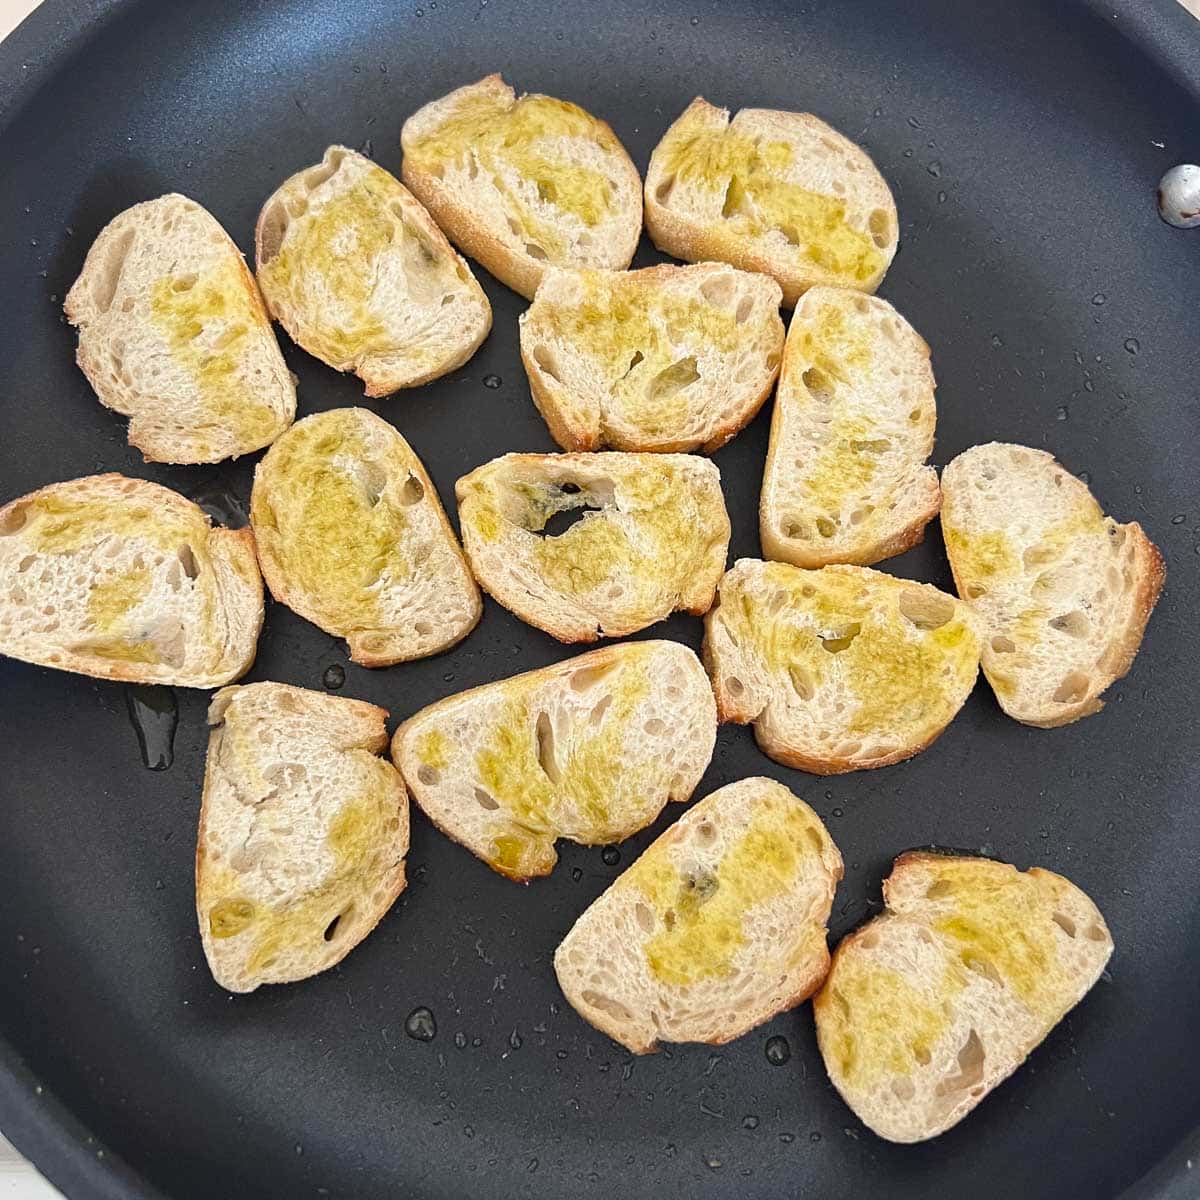 baguette slices drizzled in oil in pan